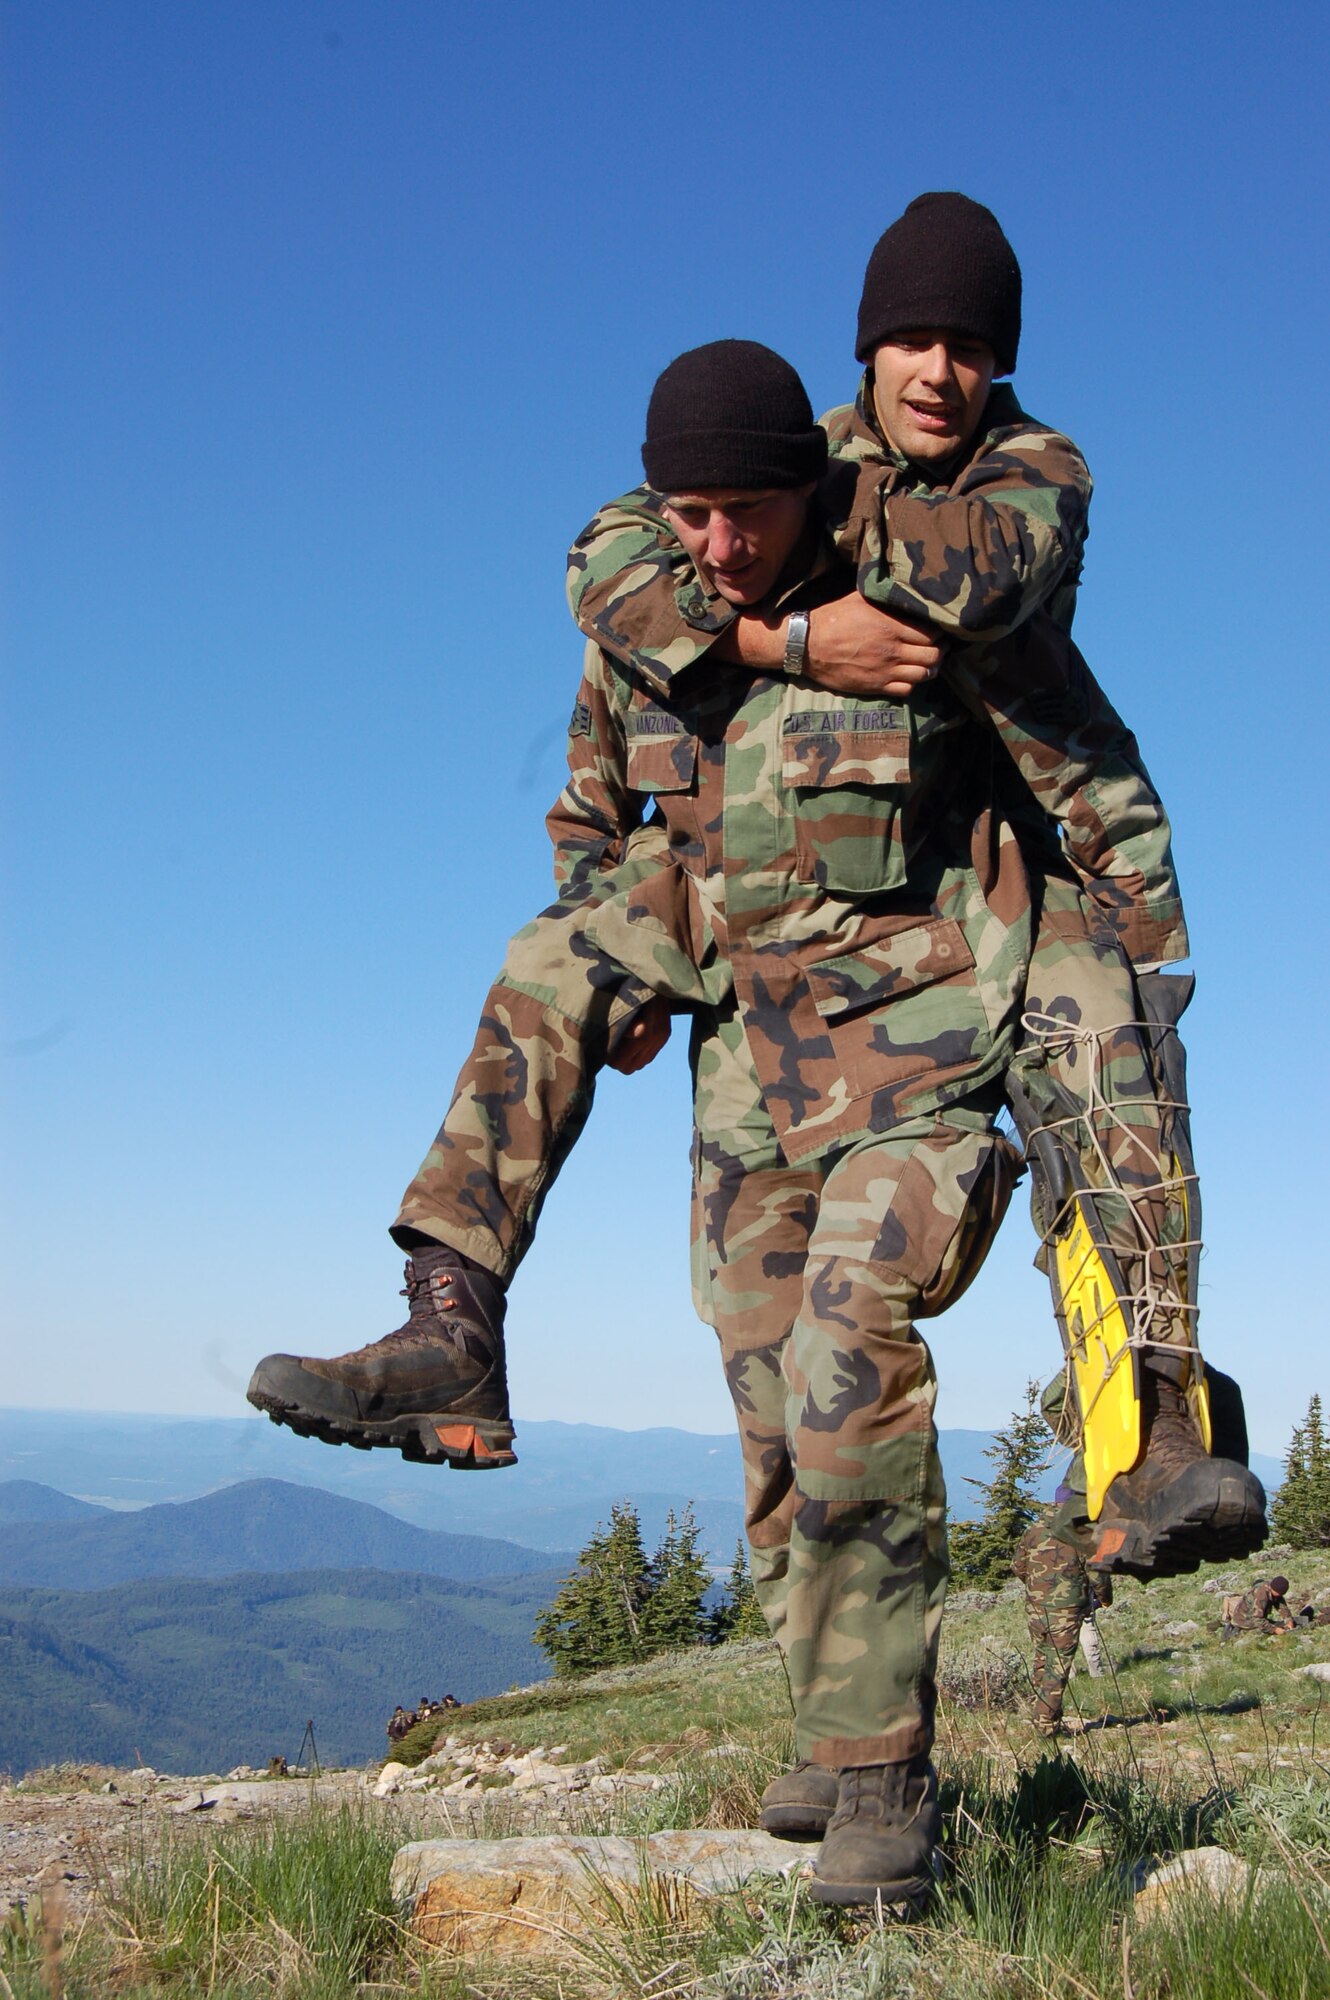 Senior Airman Gailin Manzonie carries his teammate, Senior Airman Cody Speckman, up to the top of Calispell Peak during a medical evacuation exercise as part of the 2007 SERE Challenge at the Colville National Forest north of Fairchild Air Force Base, Wash.  (U.S. Air Force photo by Staff Sgt. Matthew Rosine)